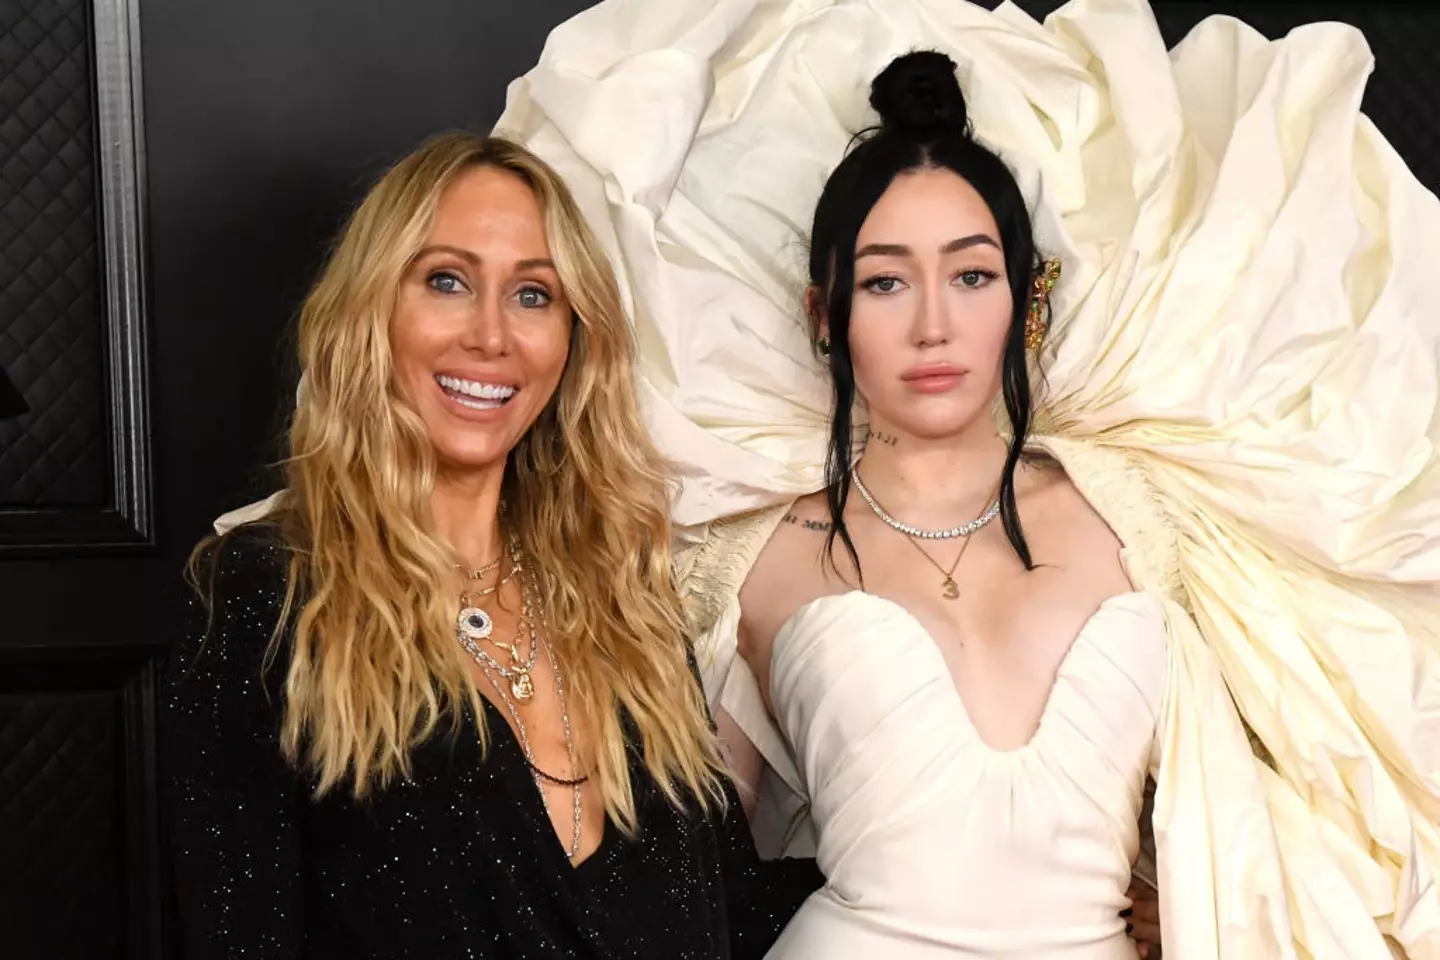 Tish Cyrus showed support for her daughter, Noah. (Kevin Mazur/Getty Images for The Recording Academy)